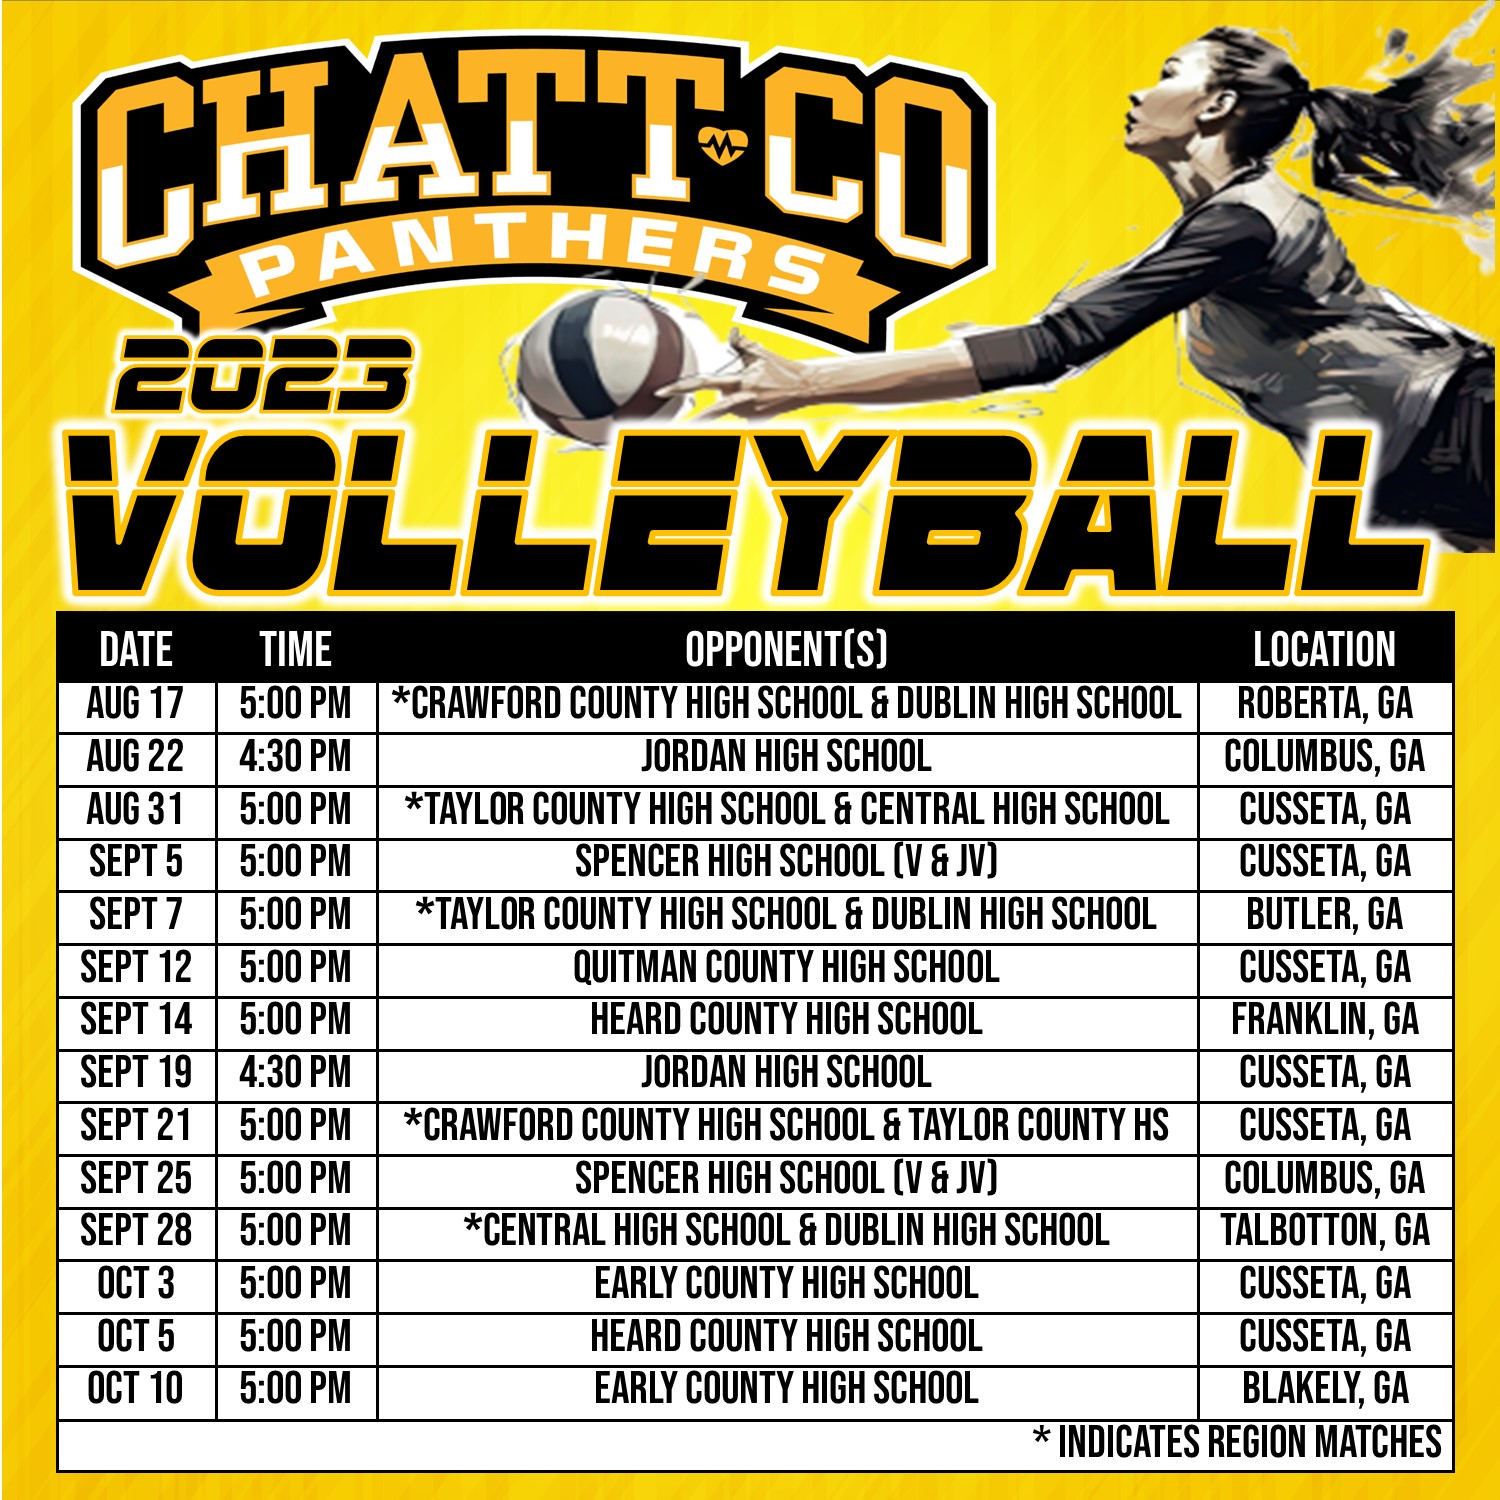 Chattco 2023 Volleyball Schedule August 17	*Crawford County High School & Dublin High School	Roberta, GA August 22	Jordan High School	Columbus, GA August 31	*Taylor County High School & Central High School	Cusseta, GA September 5	Spencer High School (V & JV)	Cusseta, GA September 7	*Taylor County High School & Dublin High School	Butler, GA September 12	Quitman County High School	Cusseta, GA September 14	Heard County High School	Franklin, GA September 19	Jordan High School	Cusseta, GA September 21	*Crawford County High School & Taylor County Hs	Cusseta, GA September 25	Spencer High School (V & JV)	Columbus, GA September 28	*Central High School & Dublin High School	Talbotton, GA October 3	Early County High School	Cusseta, GA October 5	Heard County High School	Cusseta, GA October 10	Early County High School	Blakely, GA INDICATES REGION MATCHES	* INDICATES REGION MATCHES	* INDICATES REGION MATCHES All games are 5pm except for Jordan HS is 4:30pm both home and away